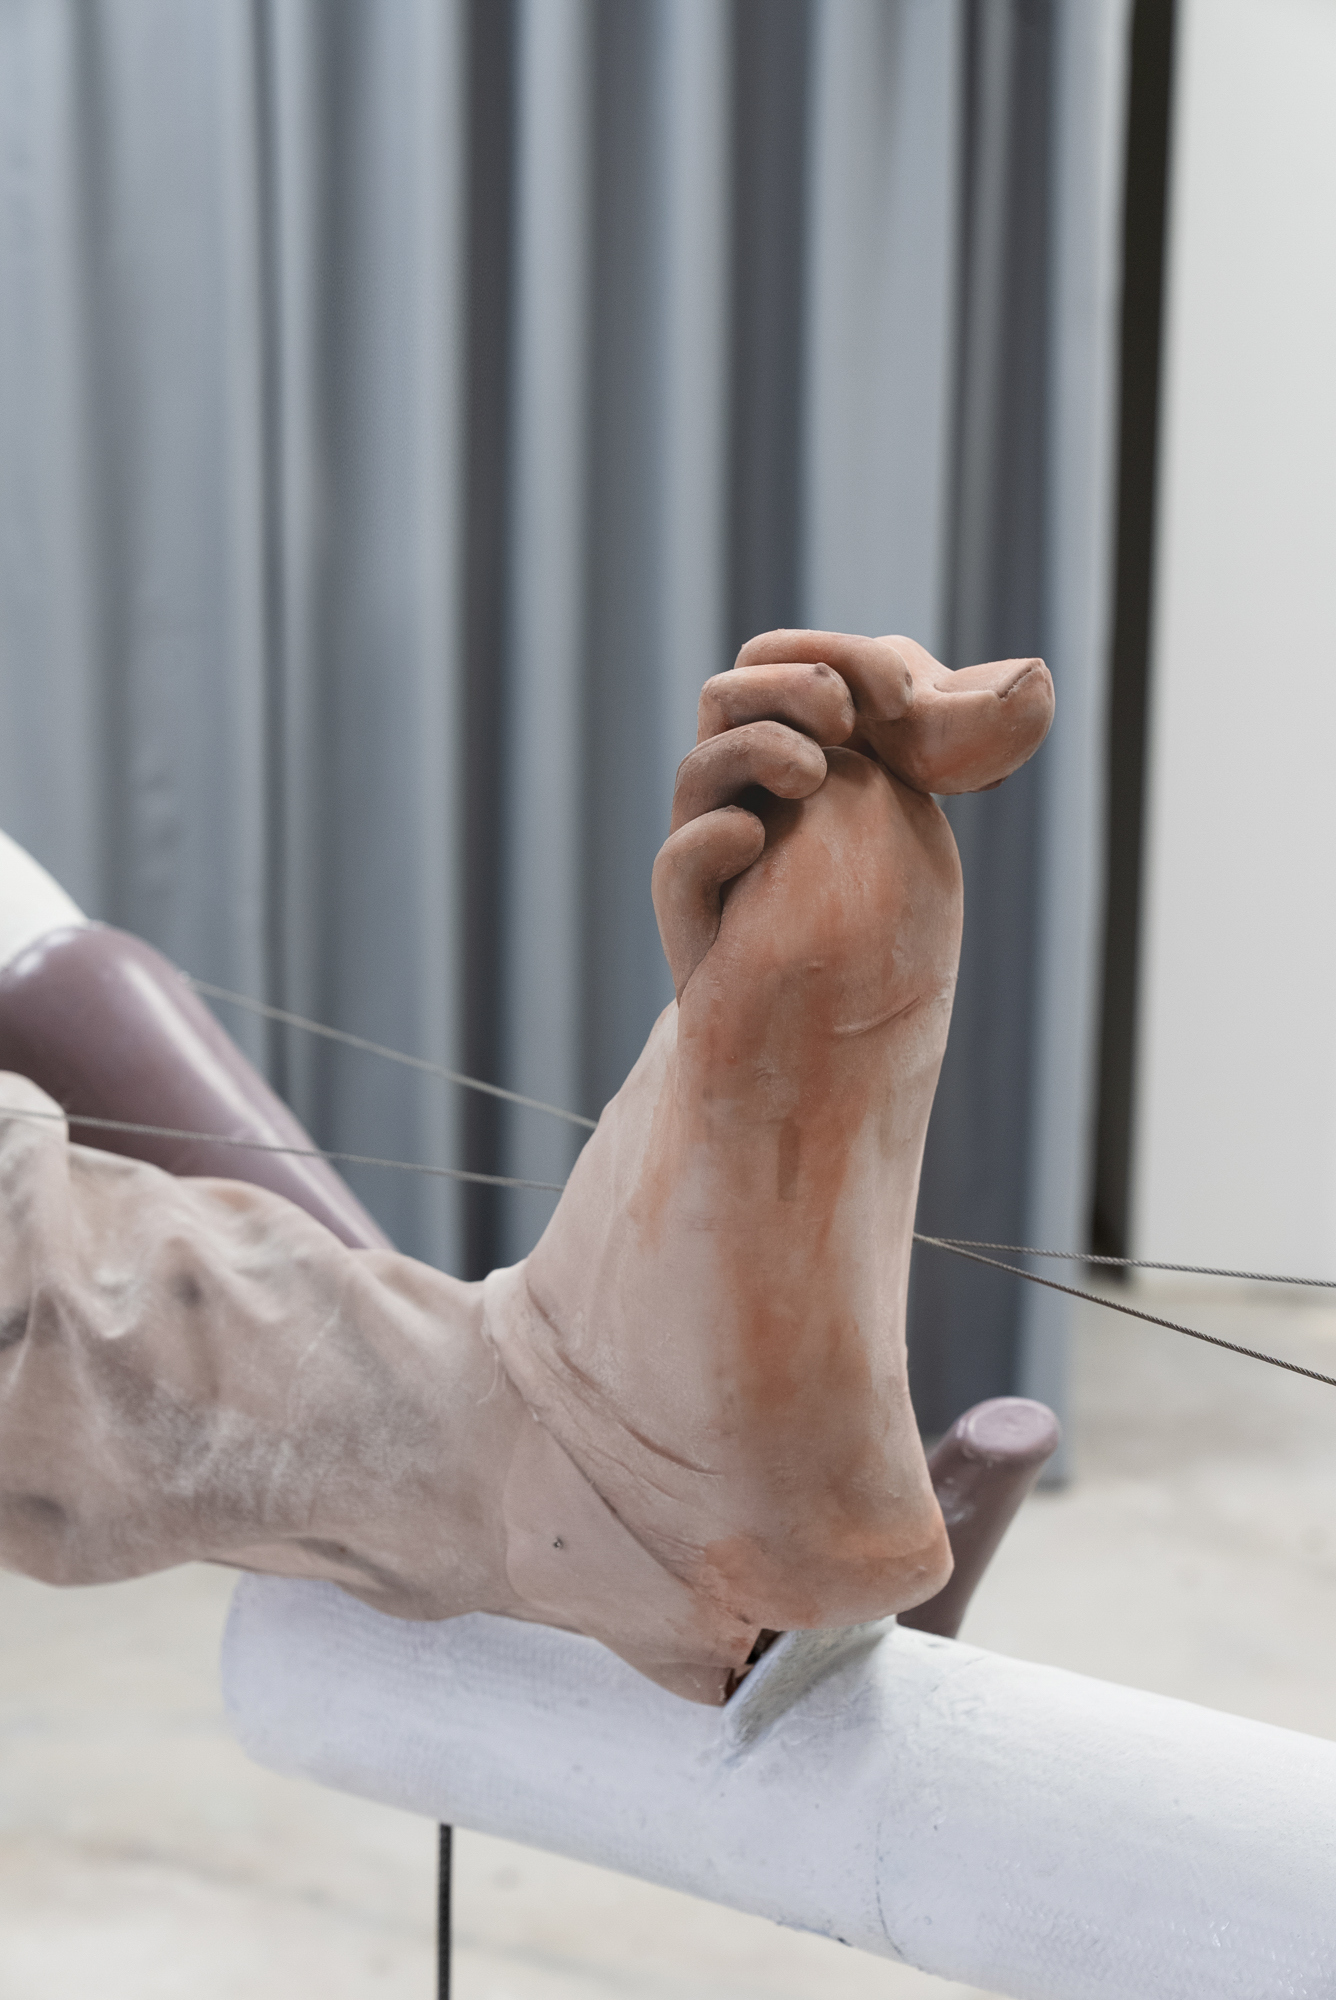 Detail: Manuel Cornelius, Sculpture for a Mall (trying on socks), 2022